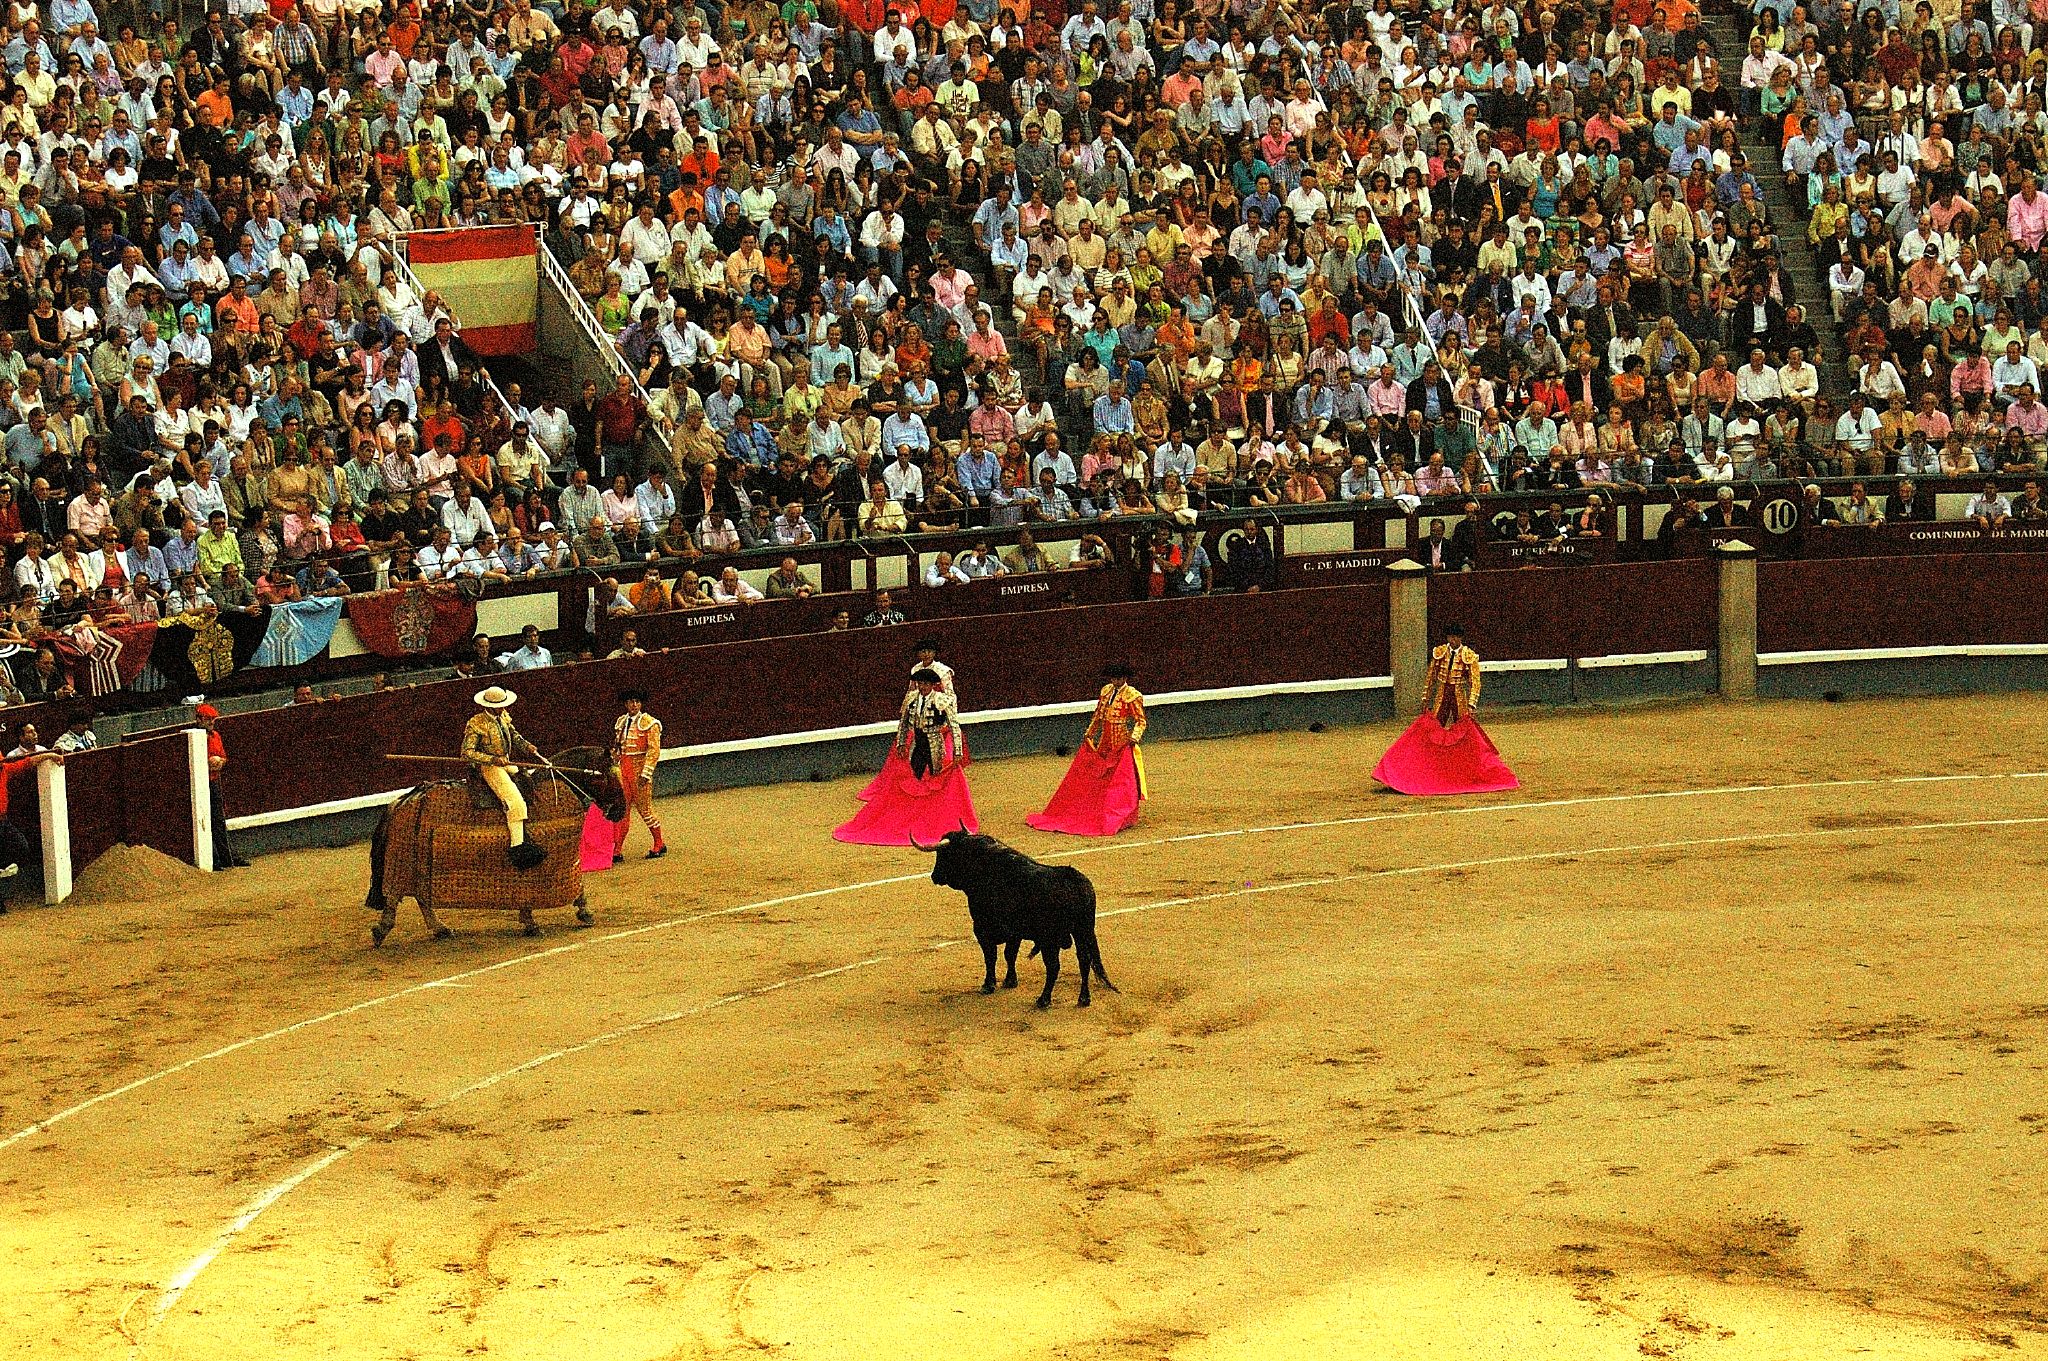 two men ride bulls in a stadium, and a bullgirl stands on one side